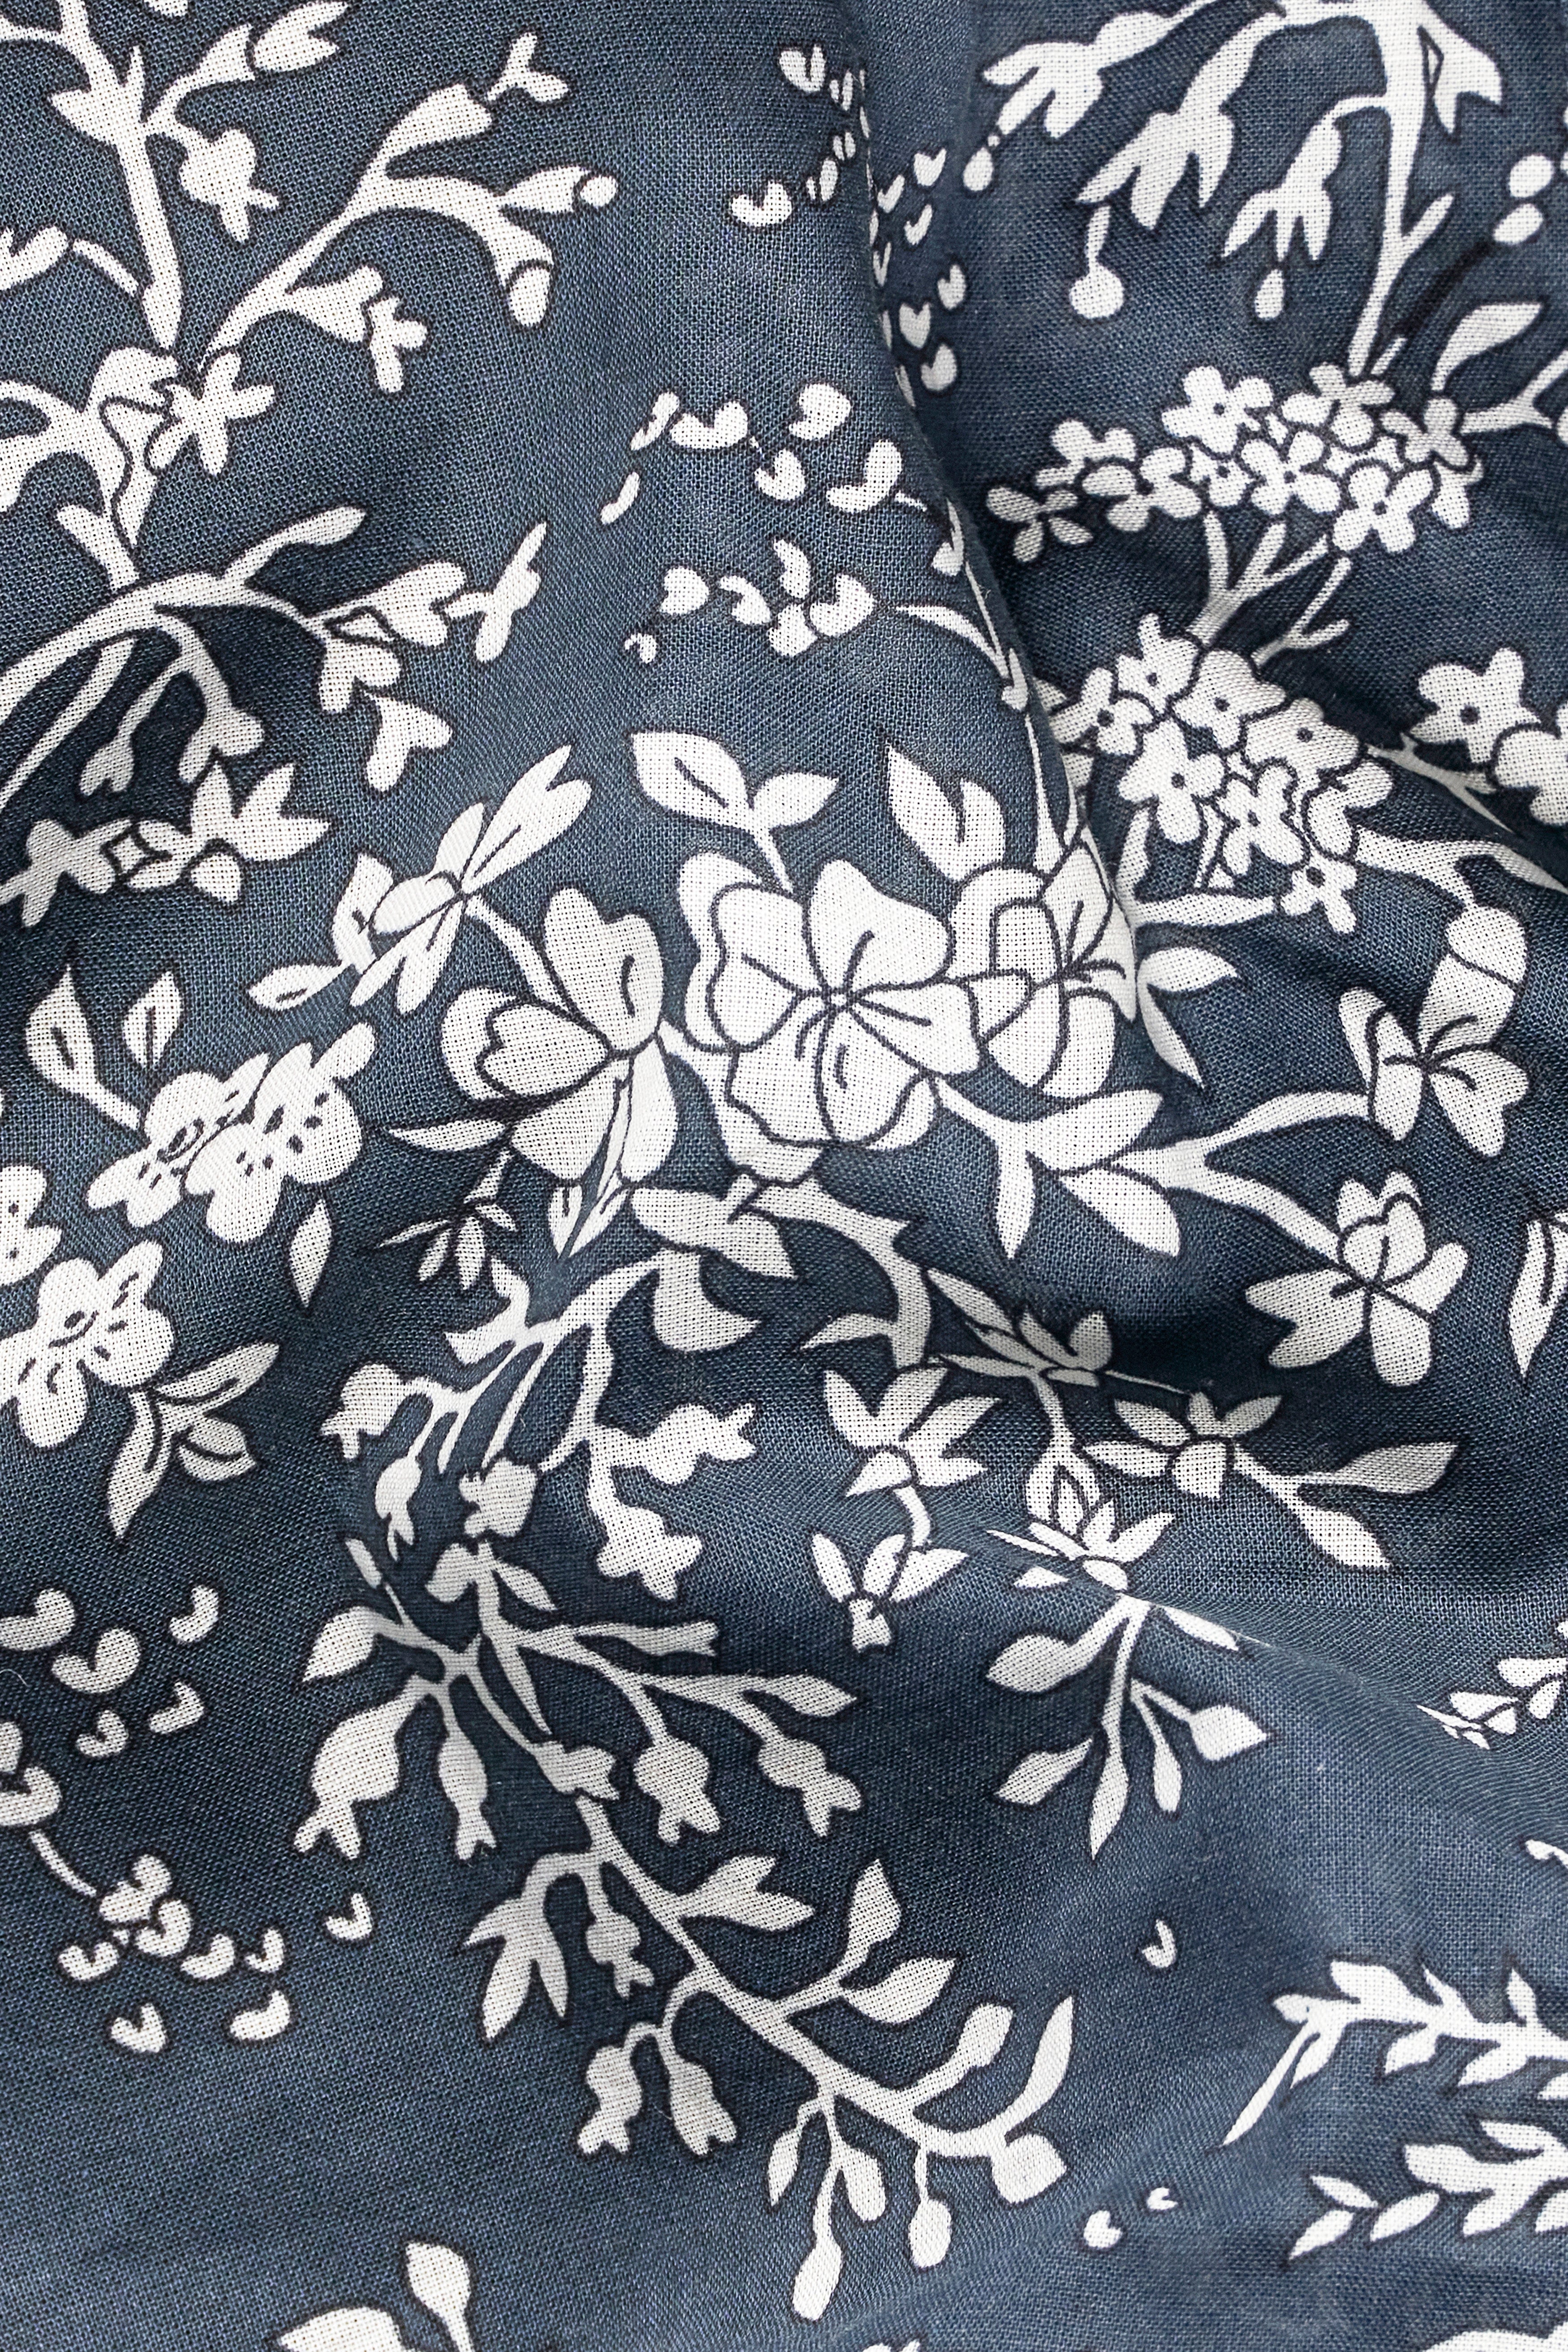 Limed Spruce Blue With White Flower Printed Premium Cotton Boxer BX534-28, BX534-30, BX534-32, BX534-34, BX534-36, BX534-38, BX534-40, BX534-42, BX534-44